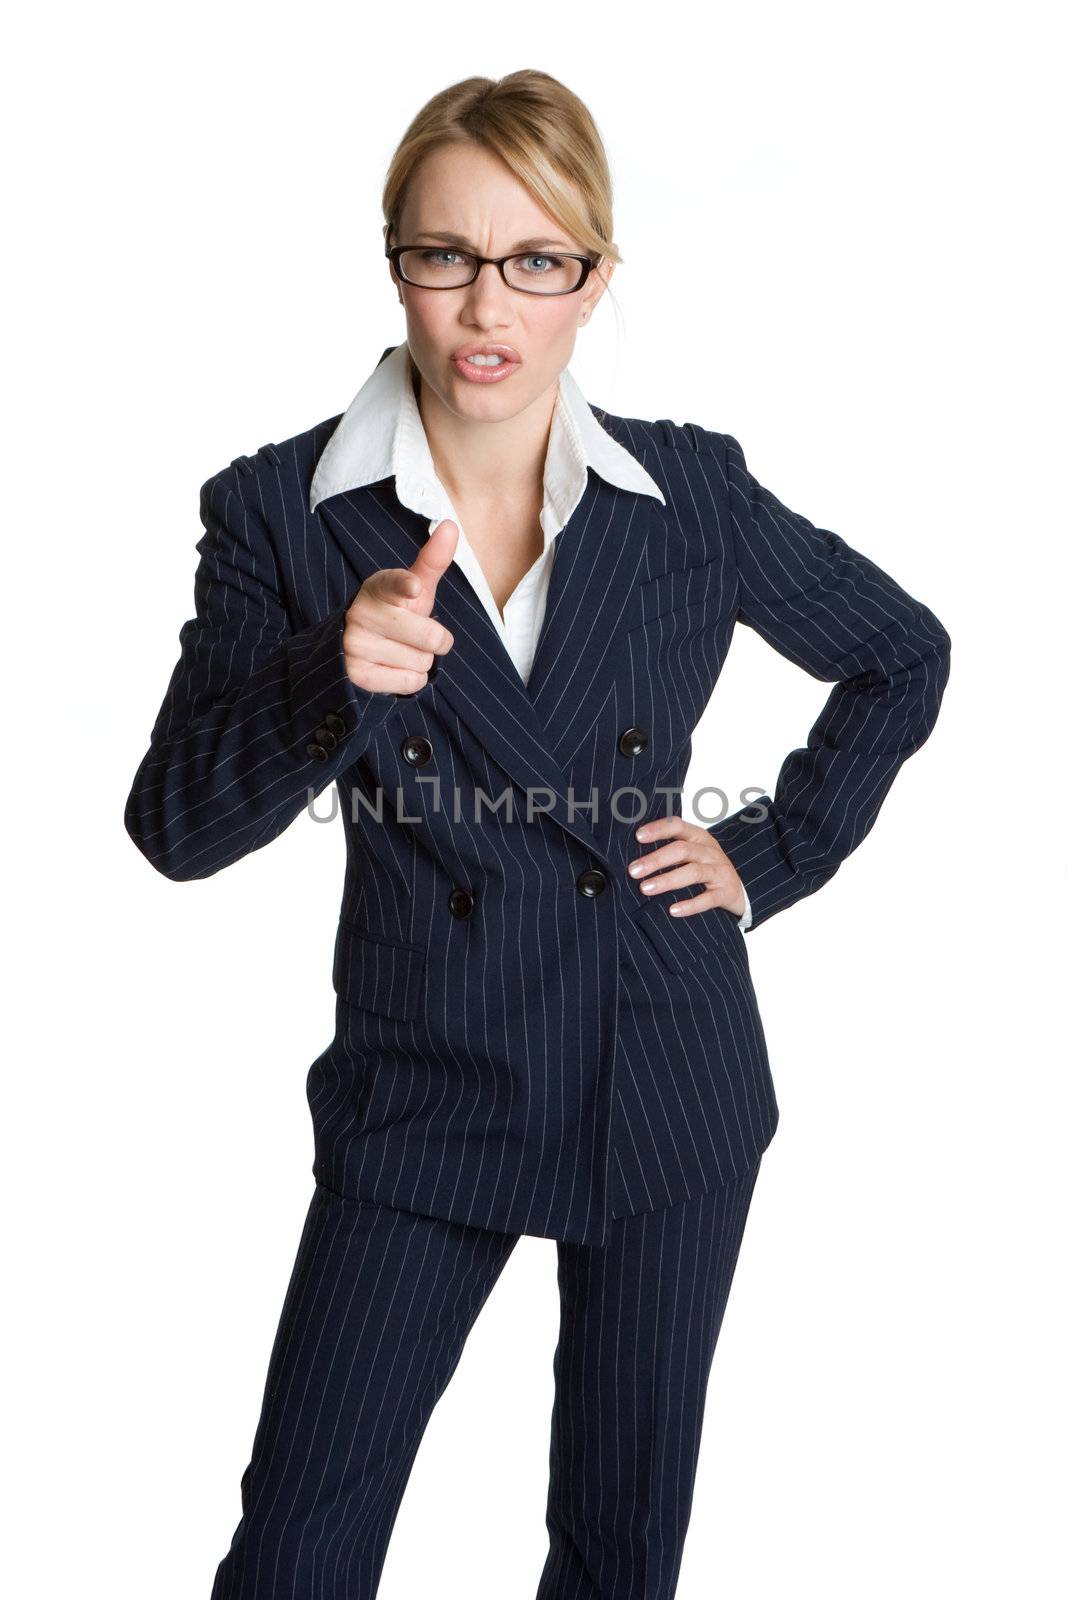 Angry Businesswoman Pointing by keeweeboy